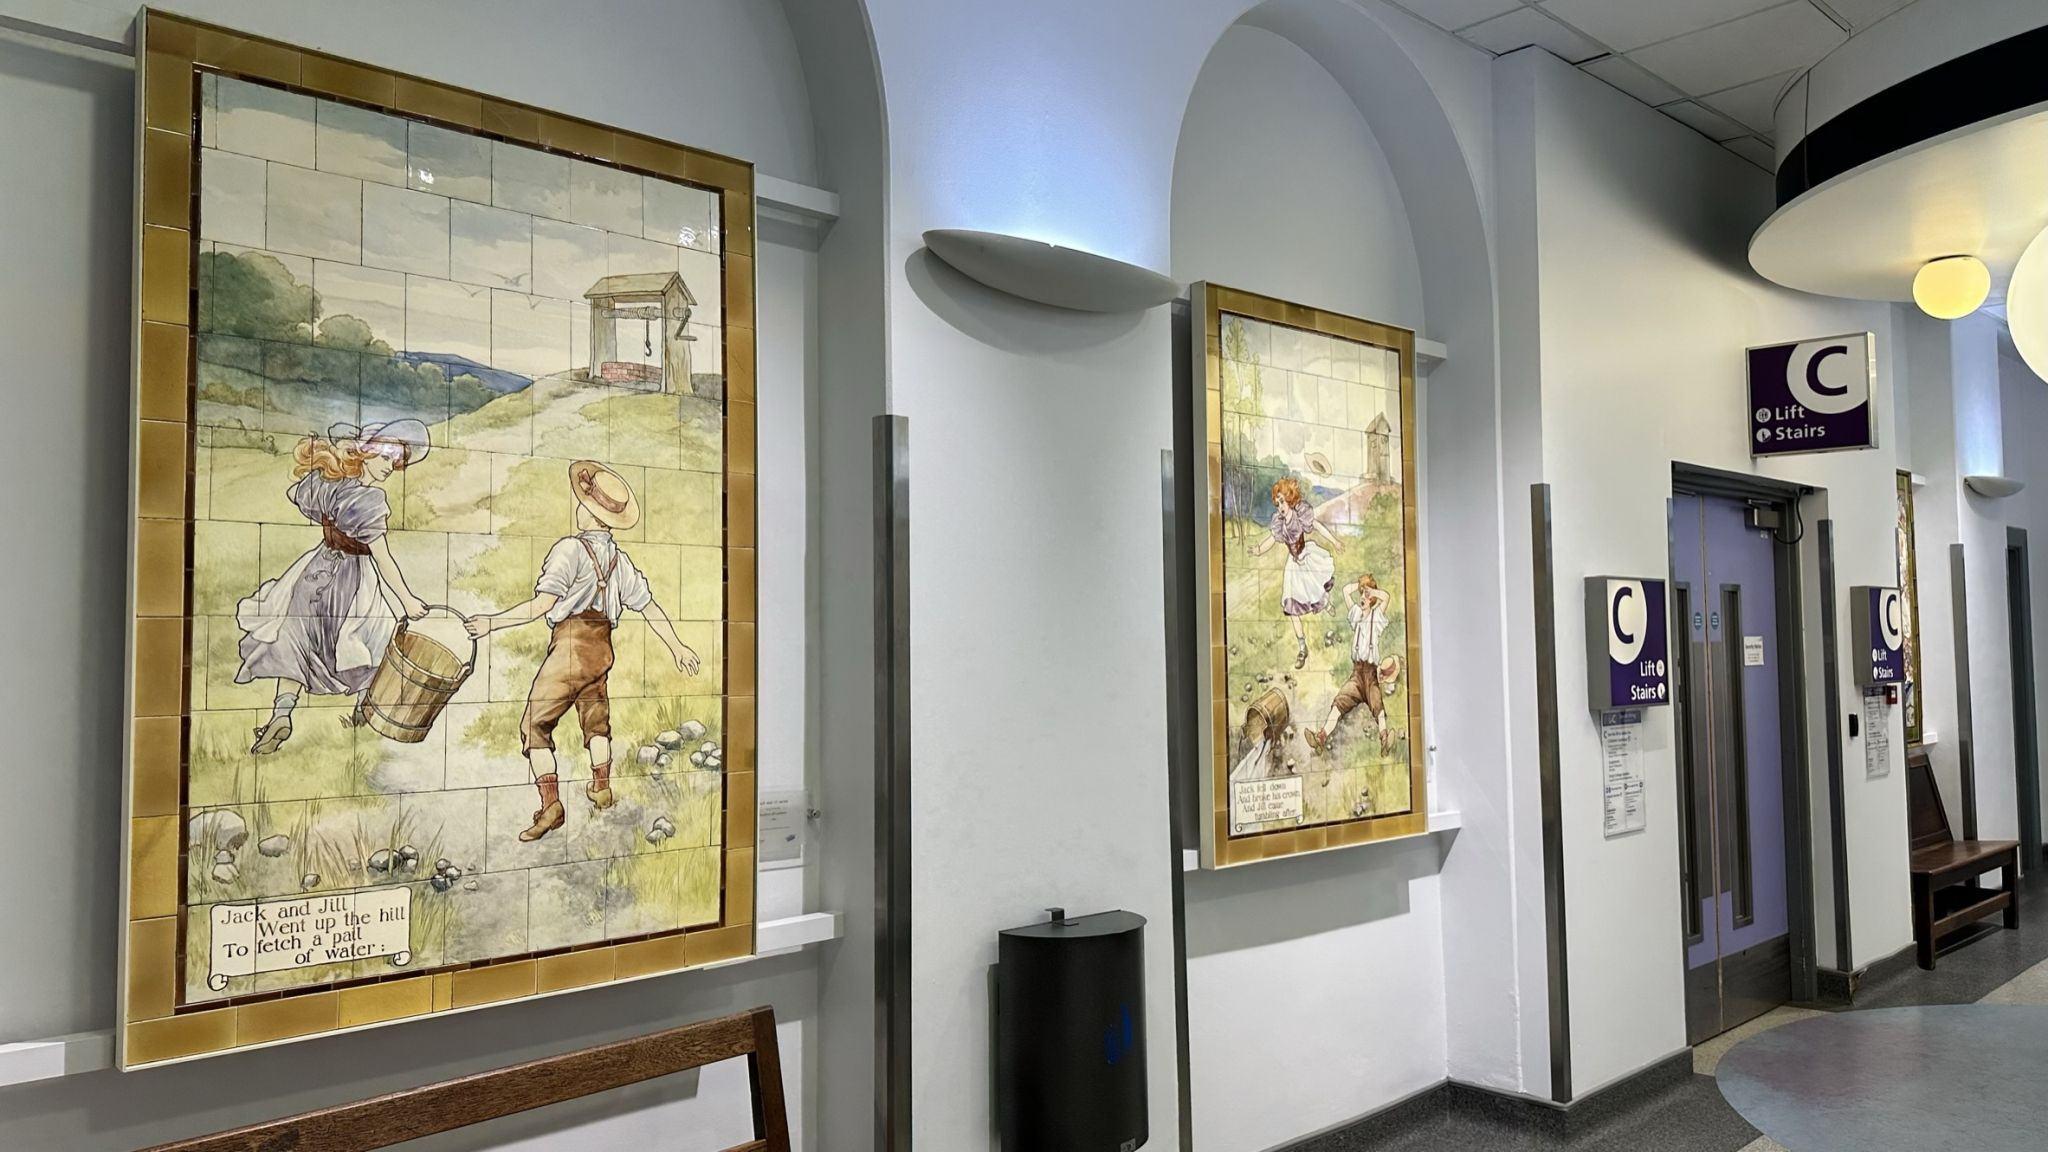 Doulton tiles from the Evelina Children's Hospital displayed in the long corridor of St Thomas' hospital.